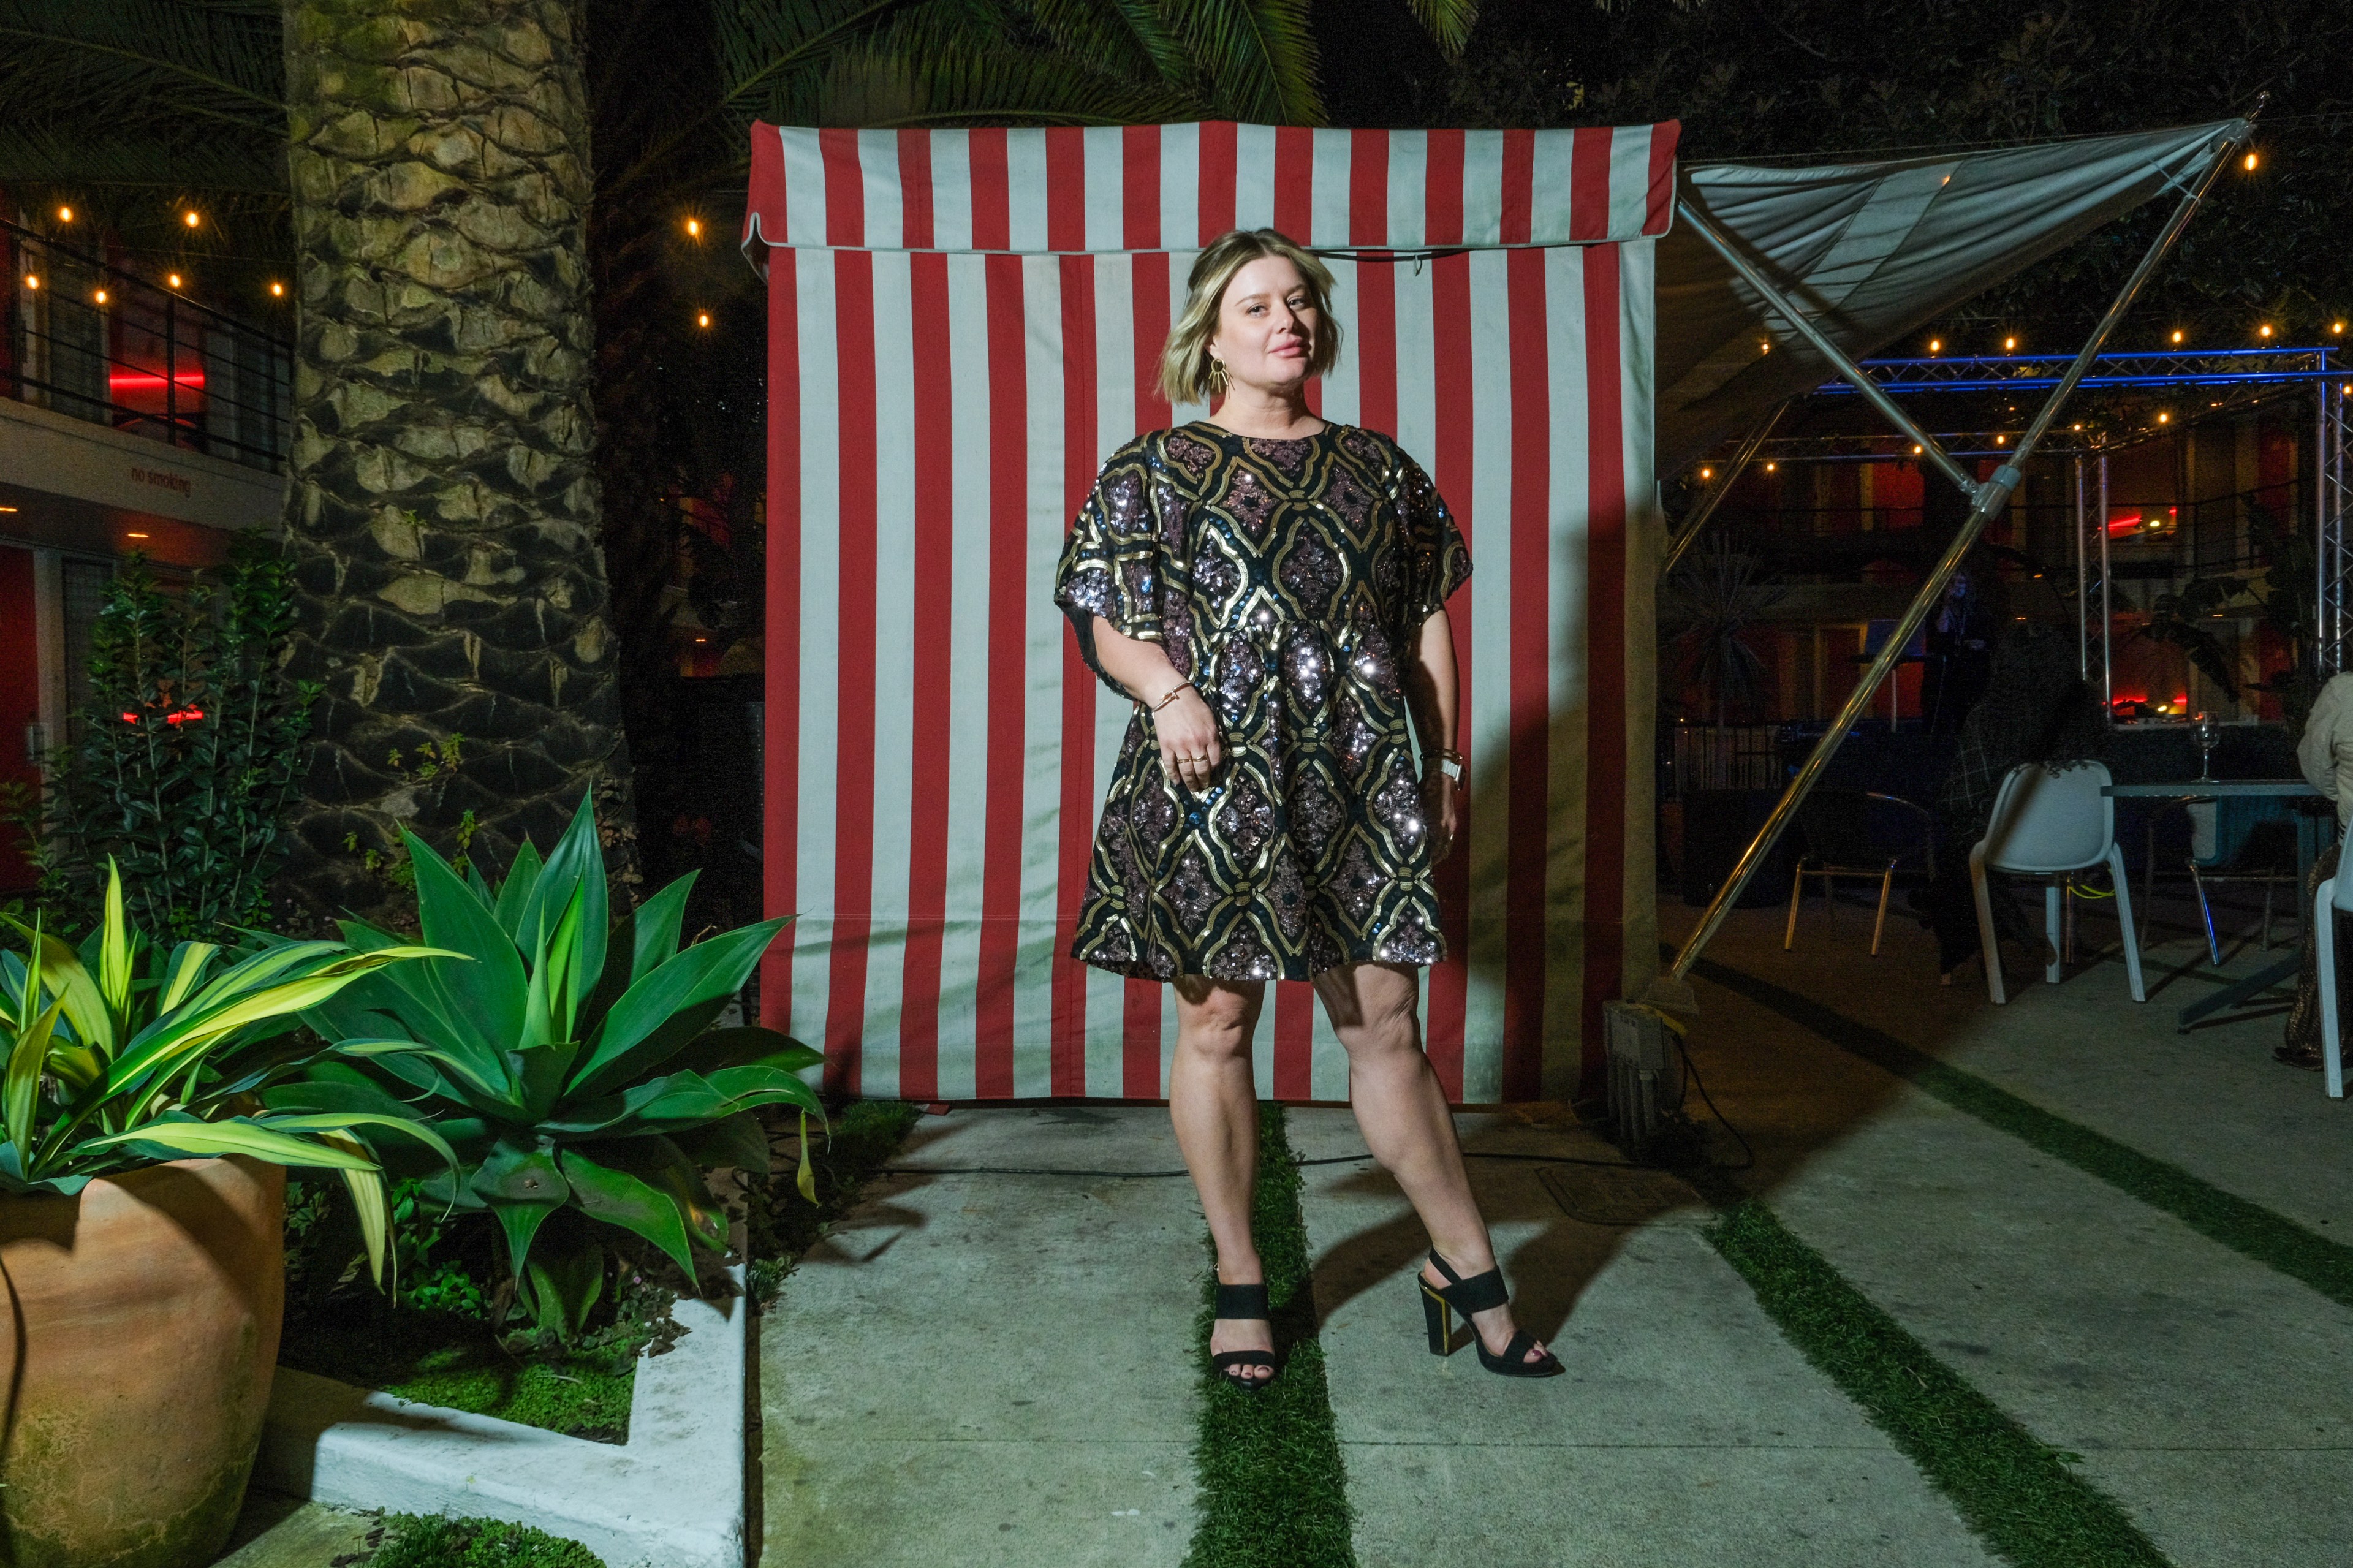 A woman poses before a striped backdrop at a nighttime outdoor event, with plants and ambient lighting around.